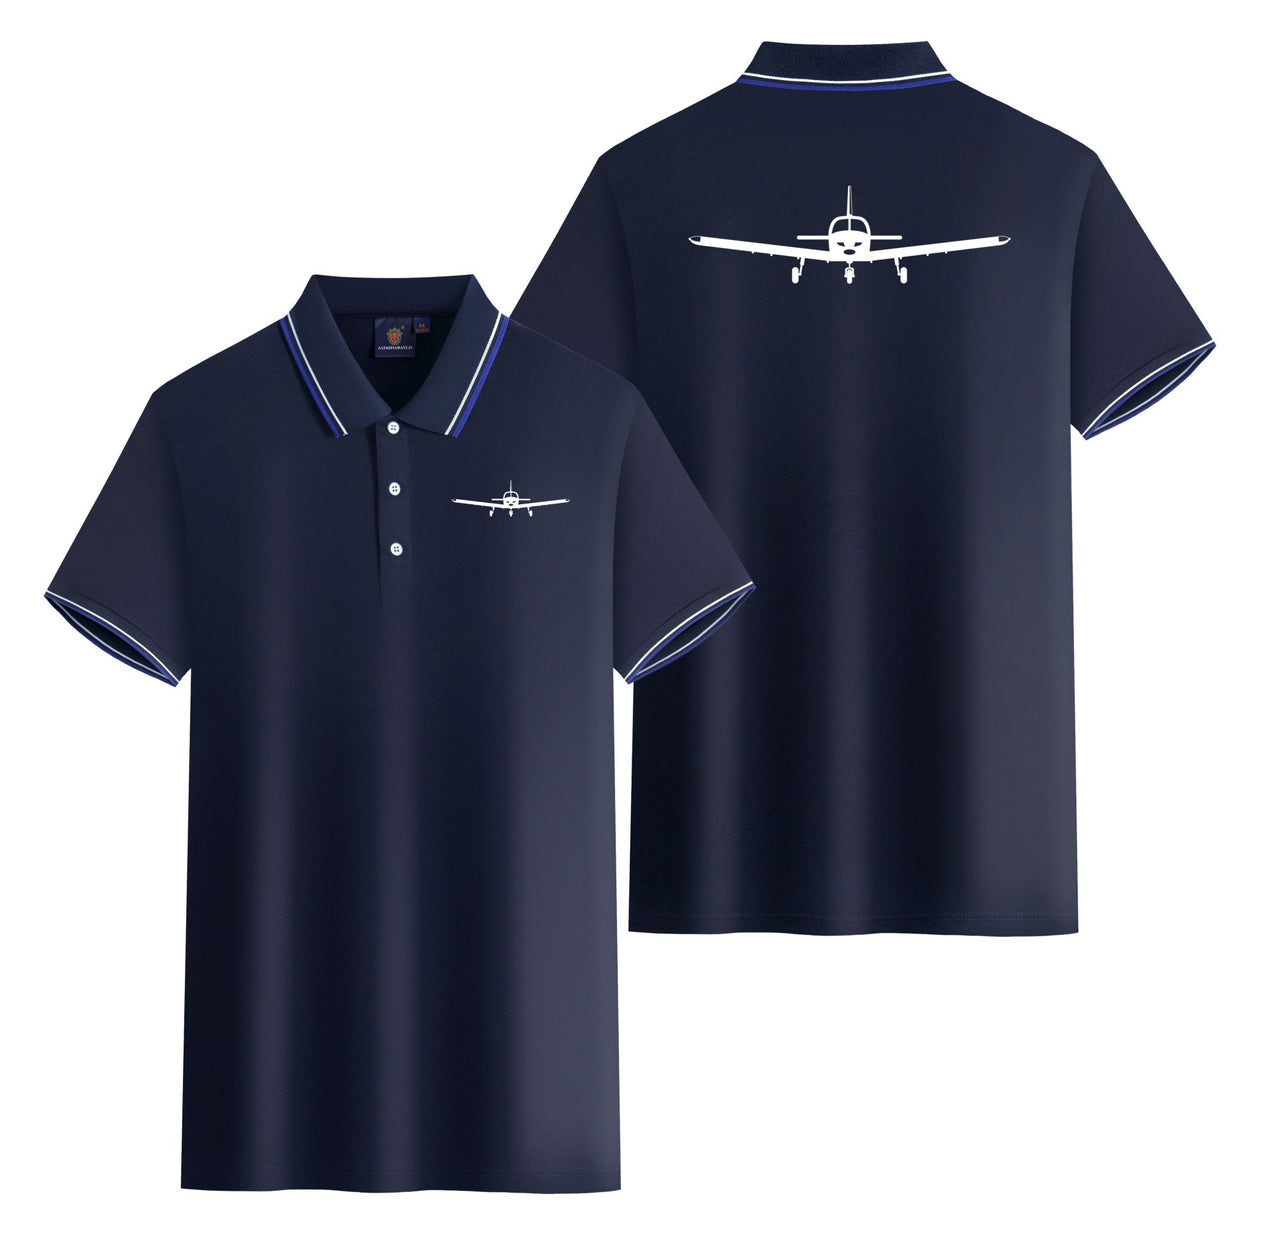 Piper PA28 Silhouette Plane Designed Stylish Polo T-Shirts (Double-Side)